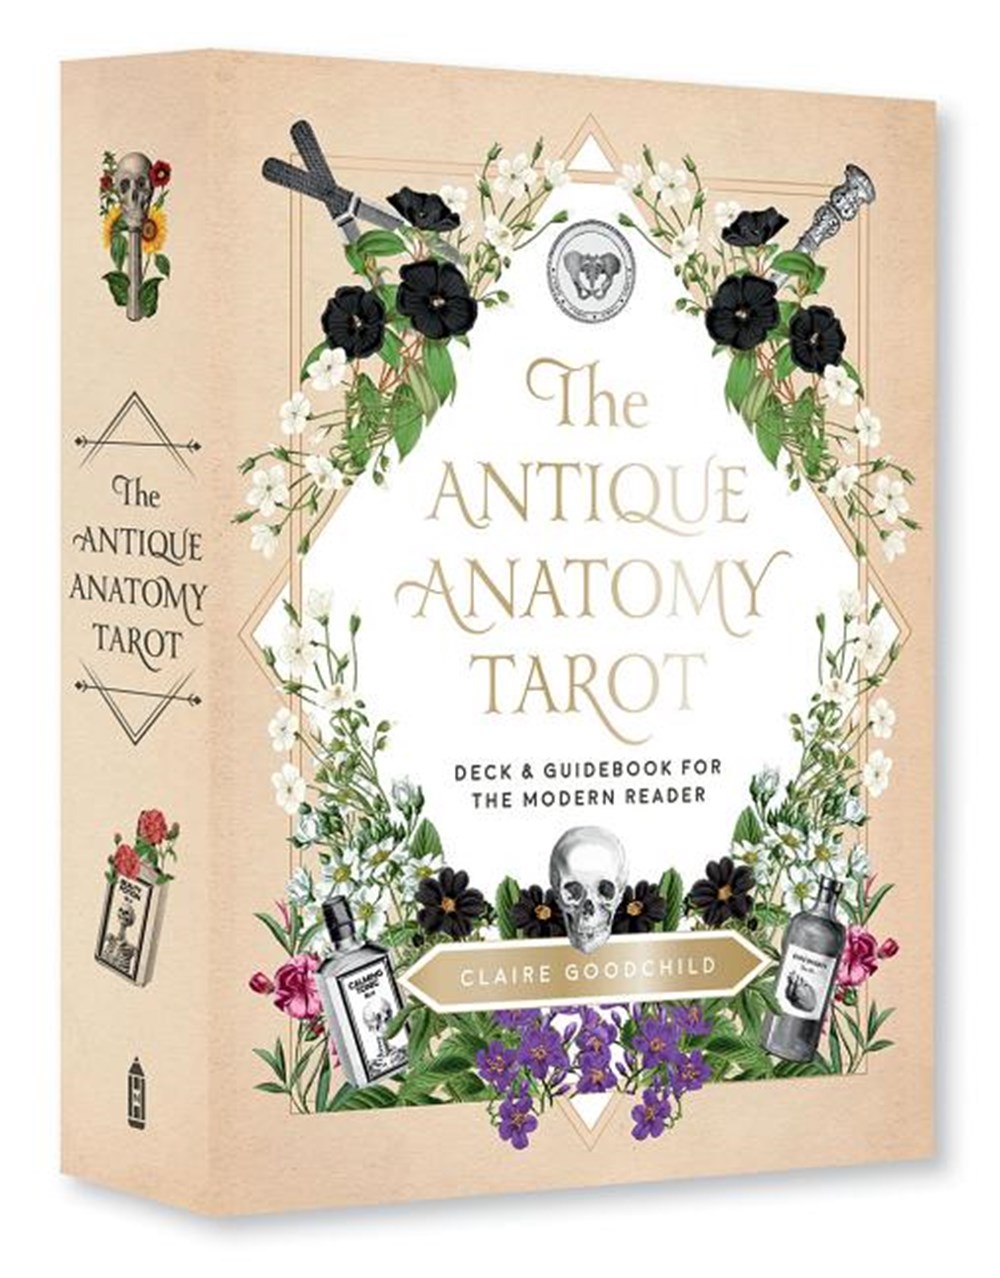 Antique Anatomy Tarot Kit: Deck and Guidebook for the Modern Reader